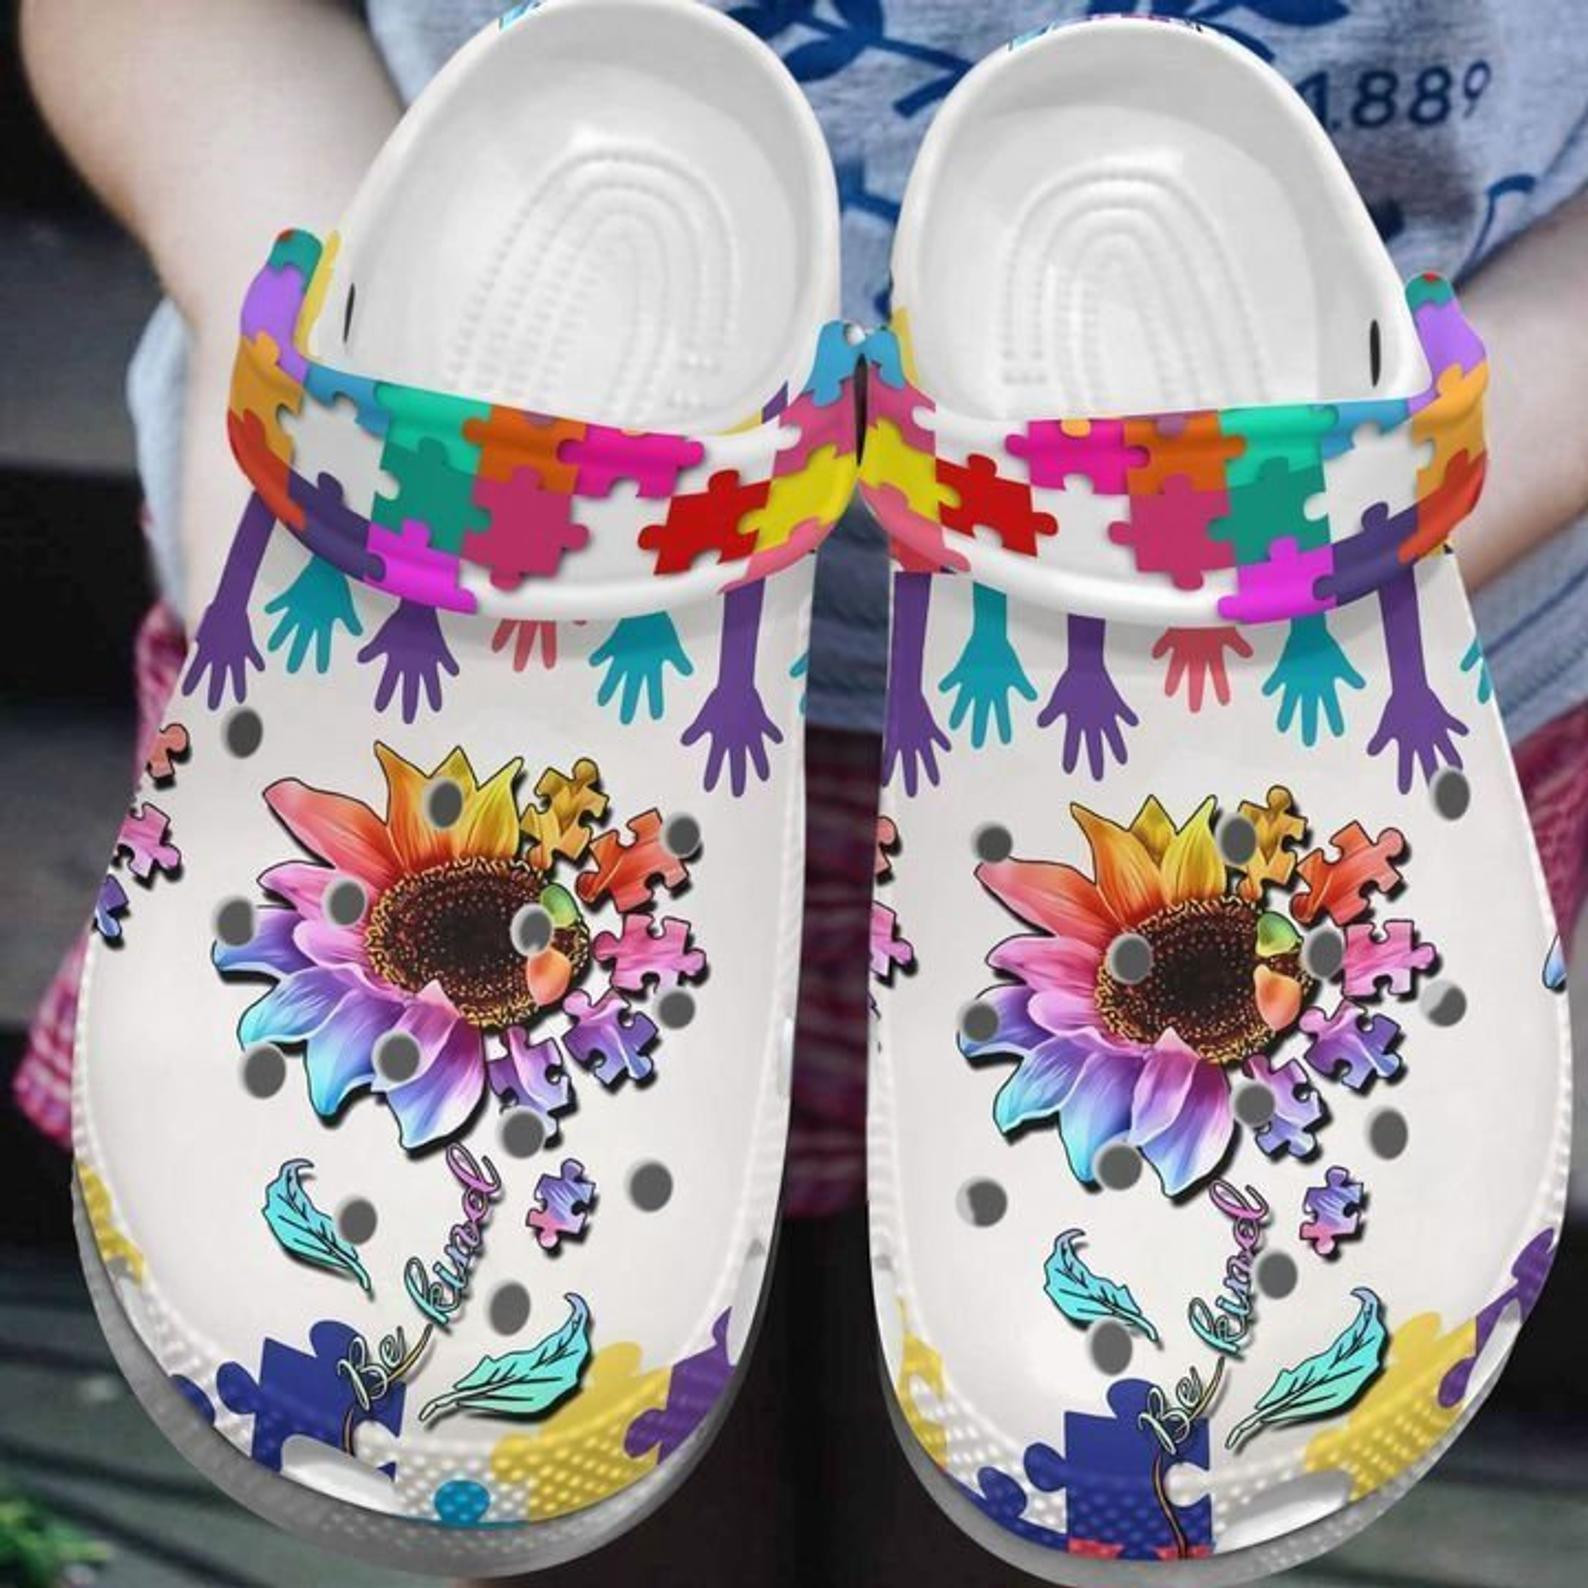 Sunflower Puzzle Crocs Shoes - Be Kind Autism Awareness Shoes Crocbland Clog Gifts For Man Woman